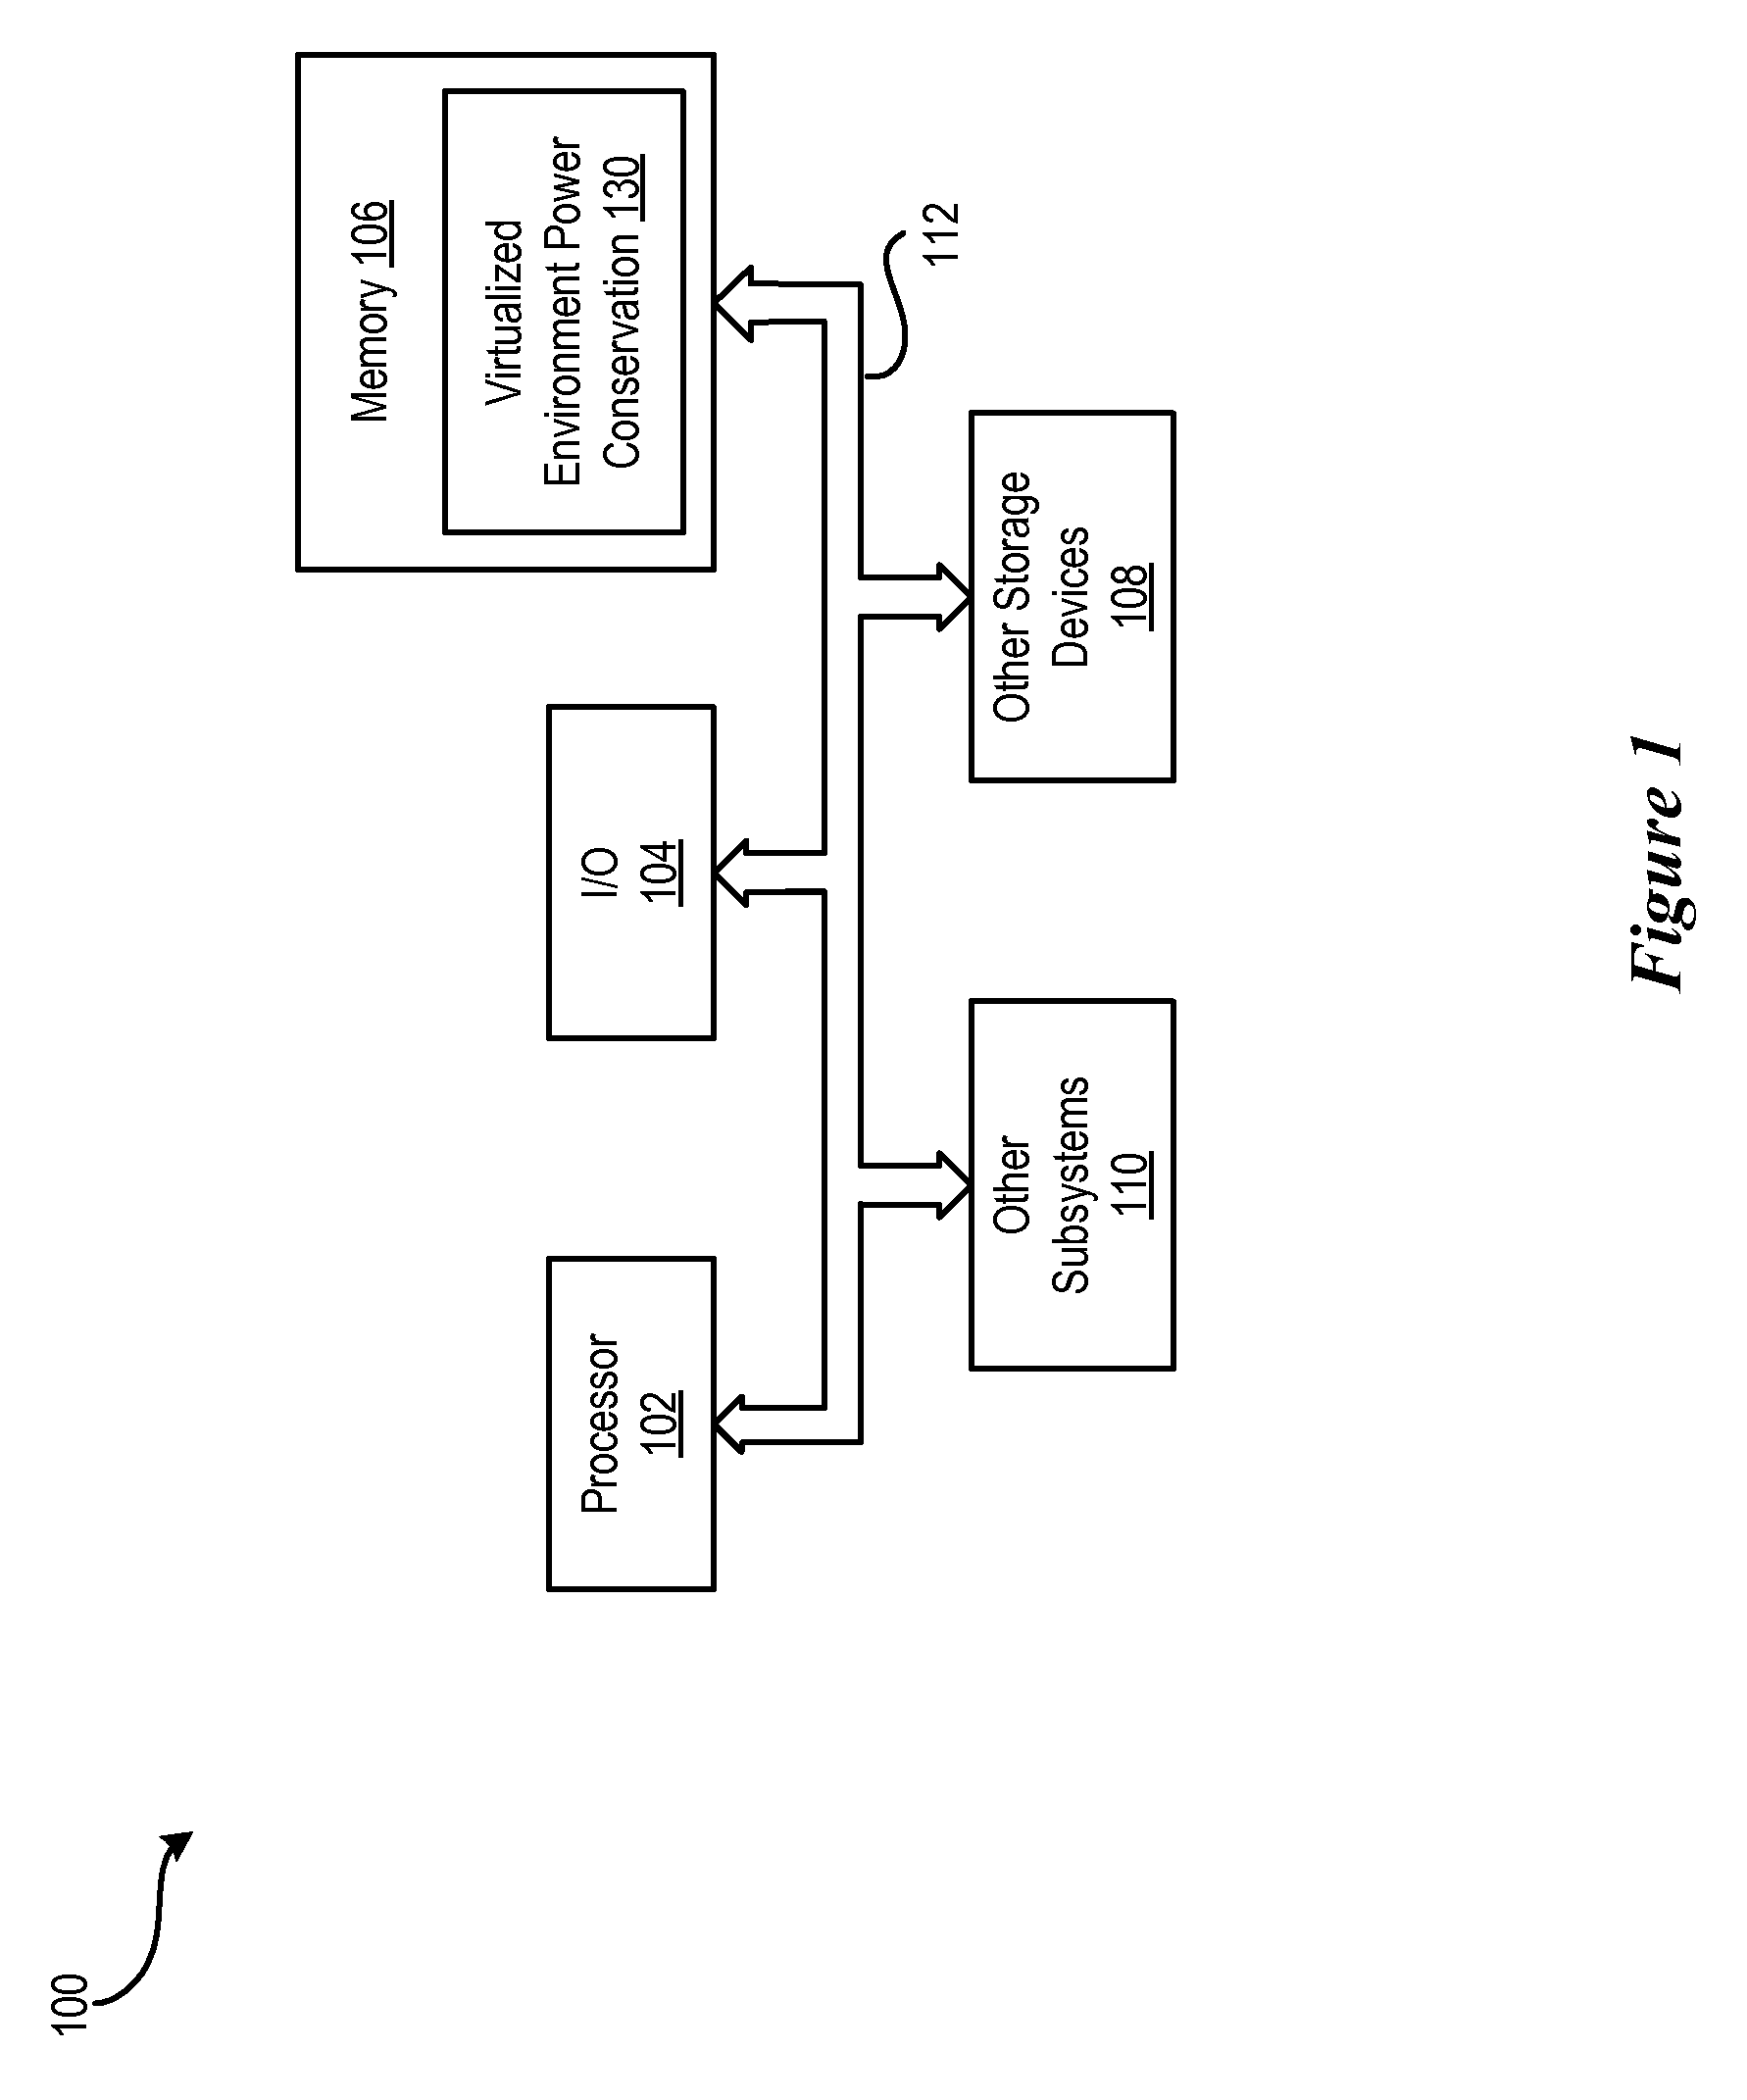 Method for power conservation in virtualized environments